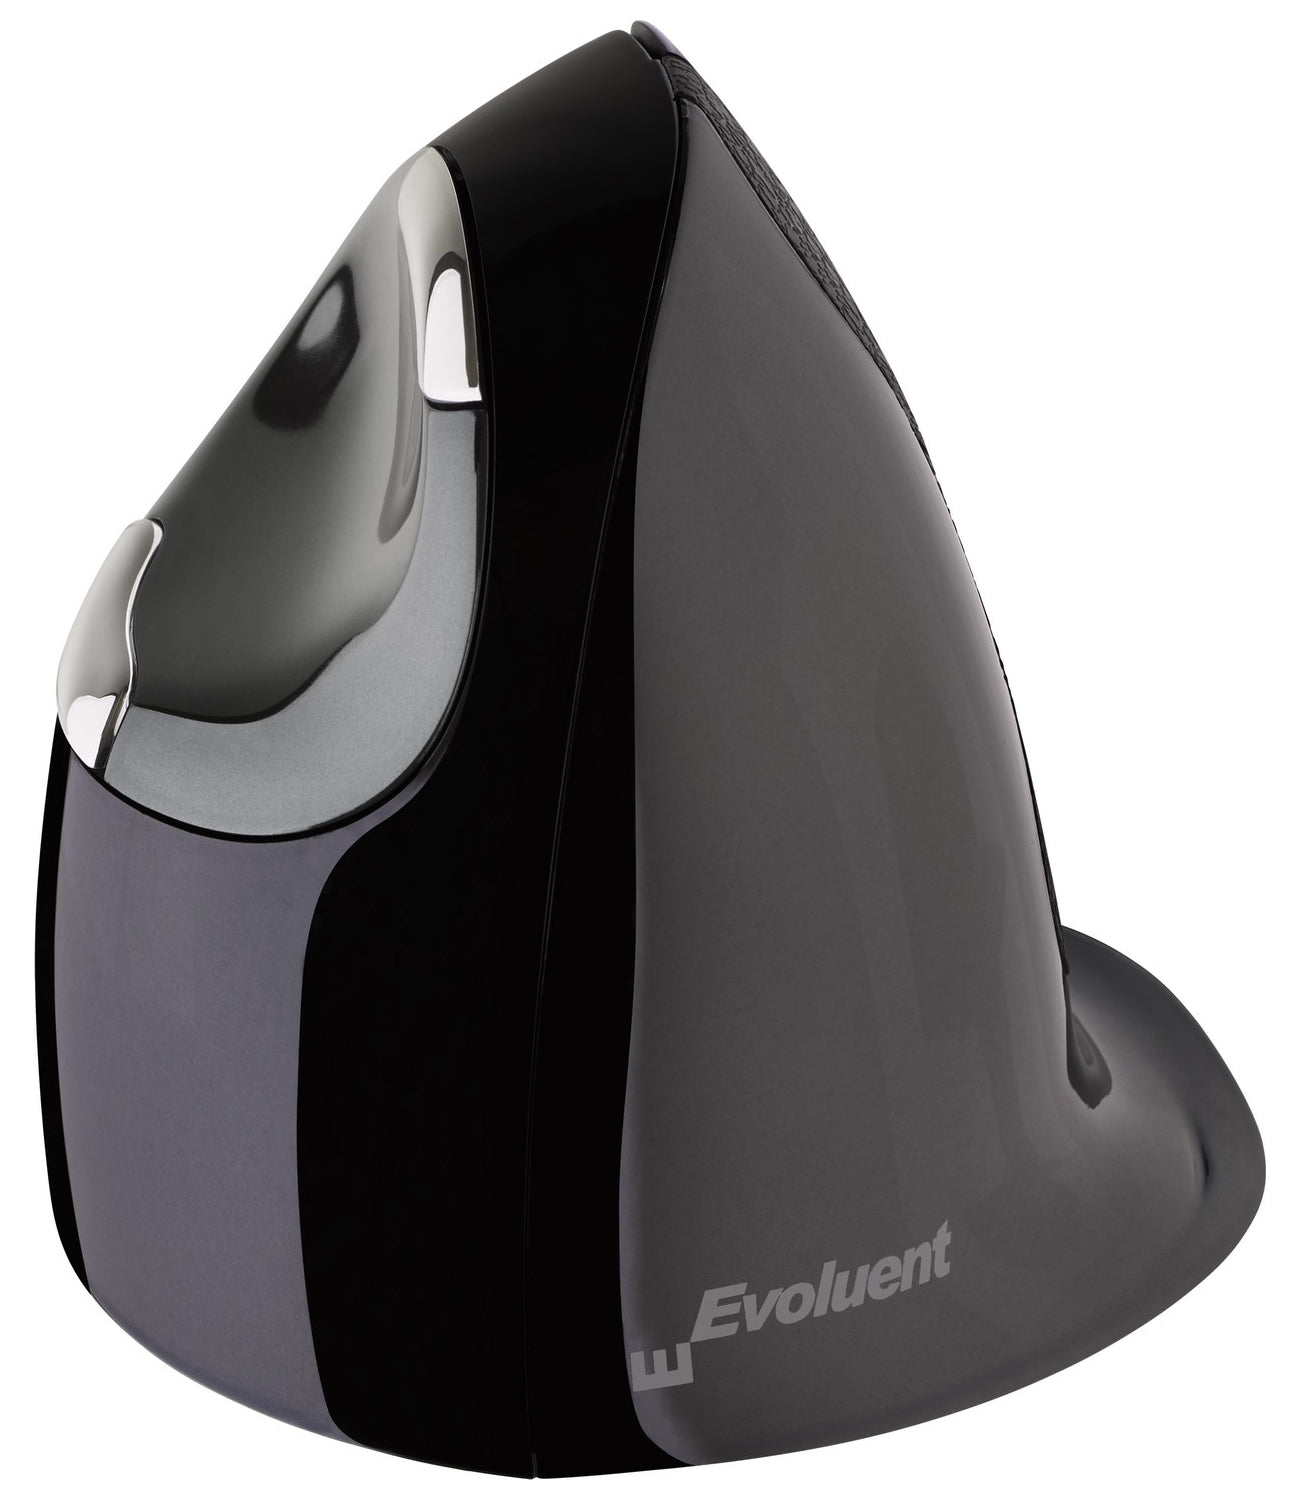 Evoluent D Mouse Wireless Small